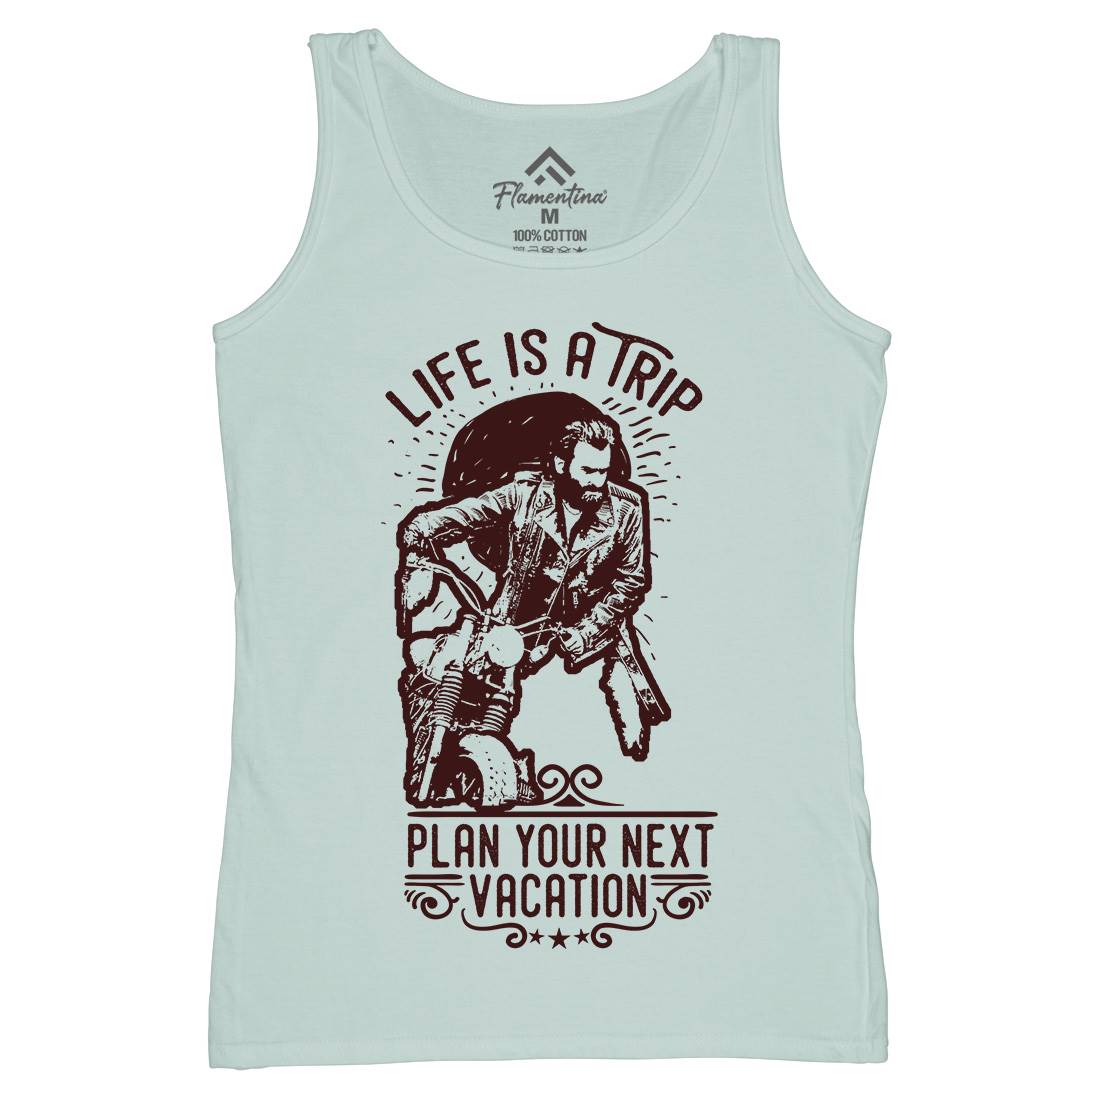 Life Is A Trip Womens Organic Tank Top Vest Motorcycles C959